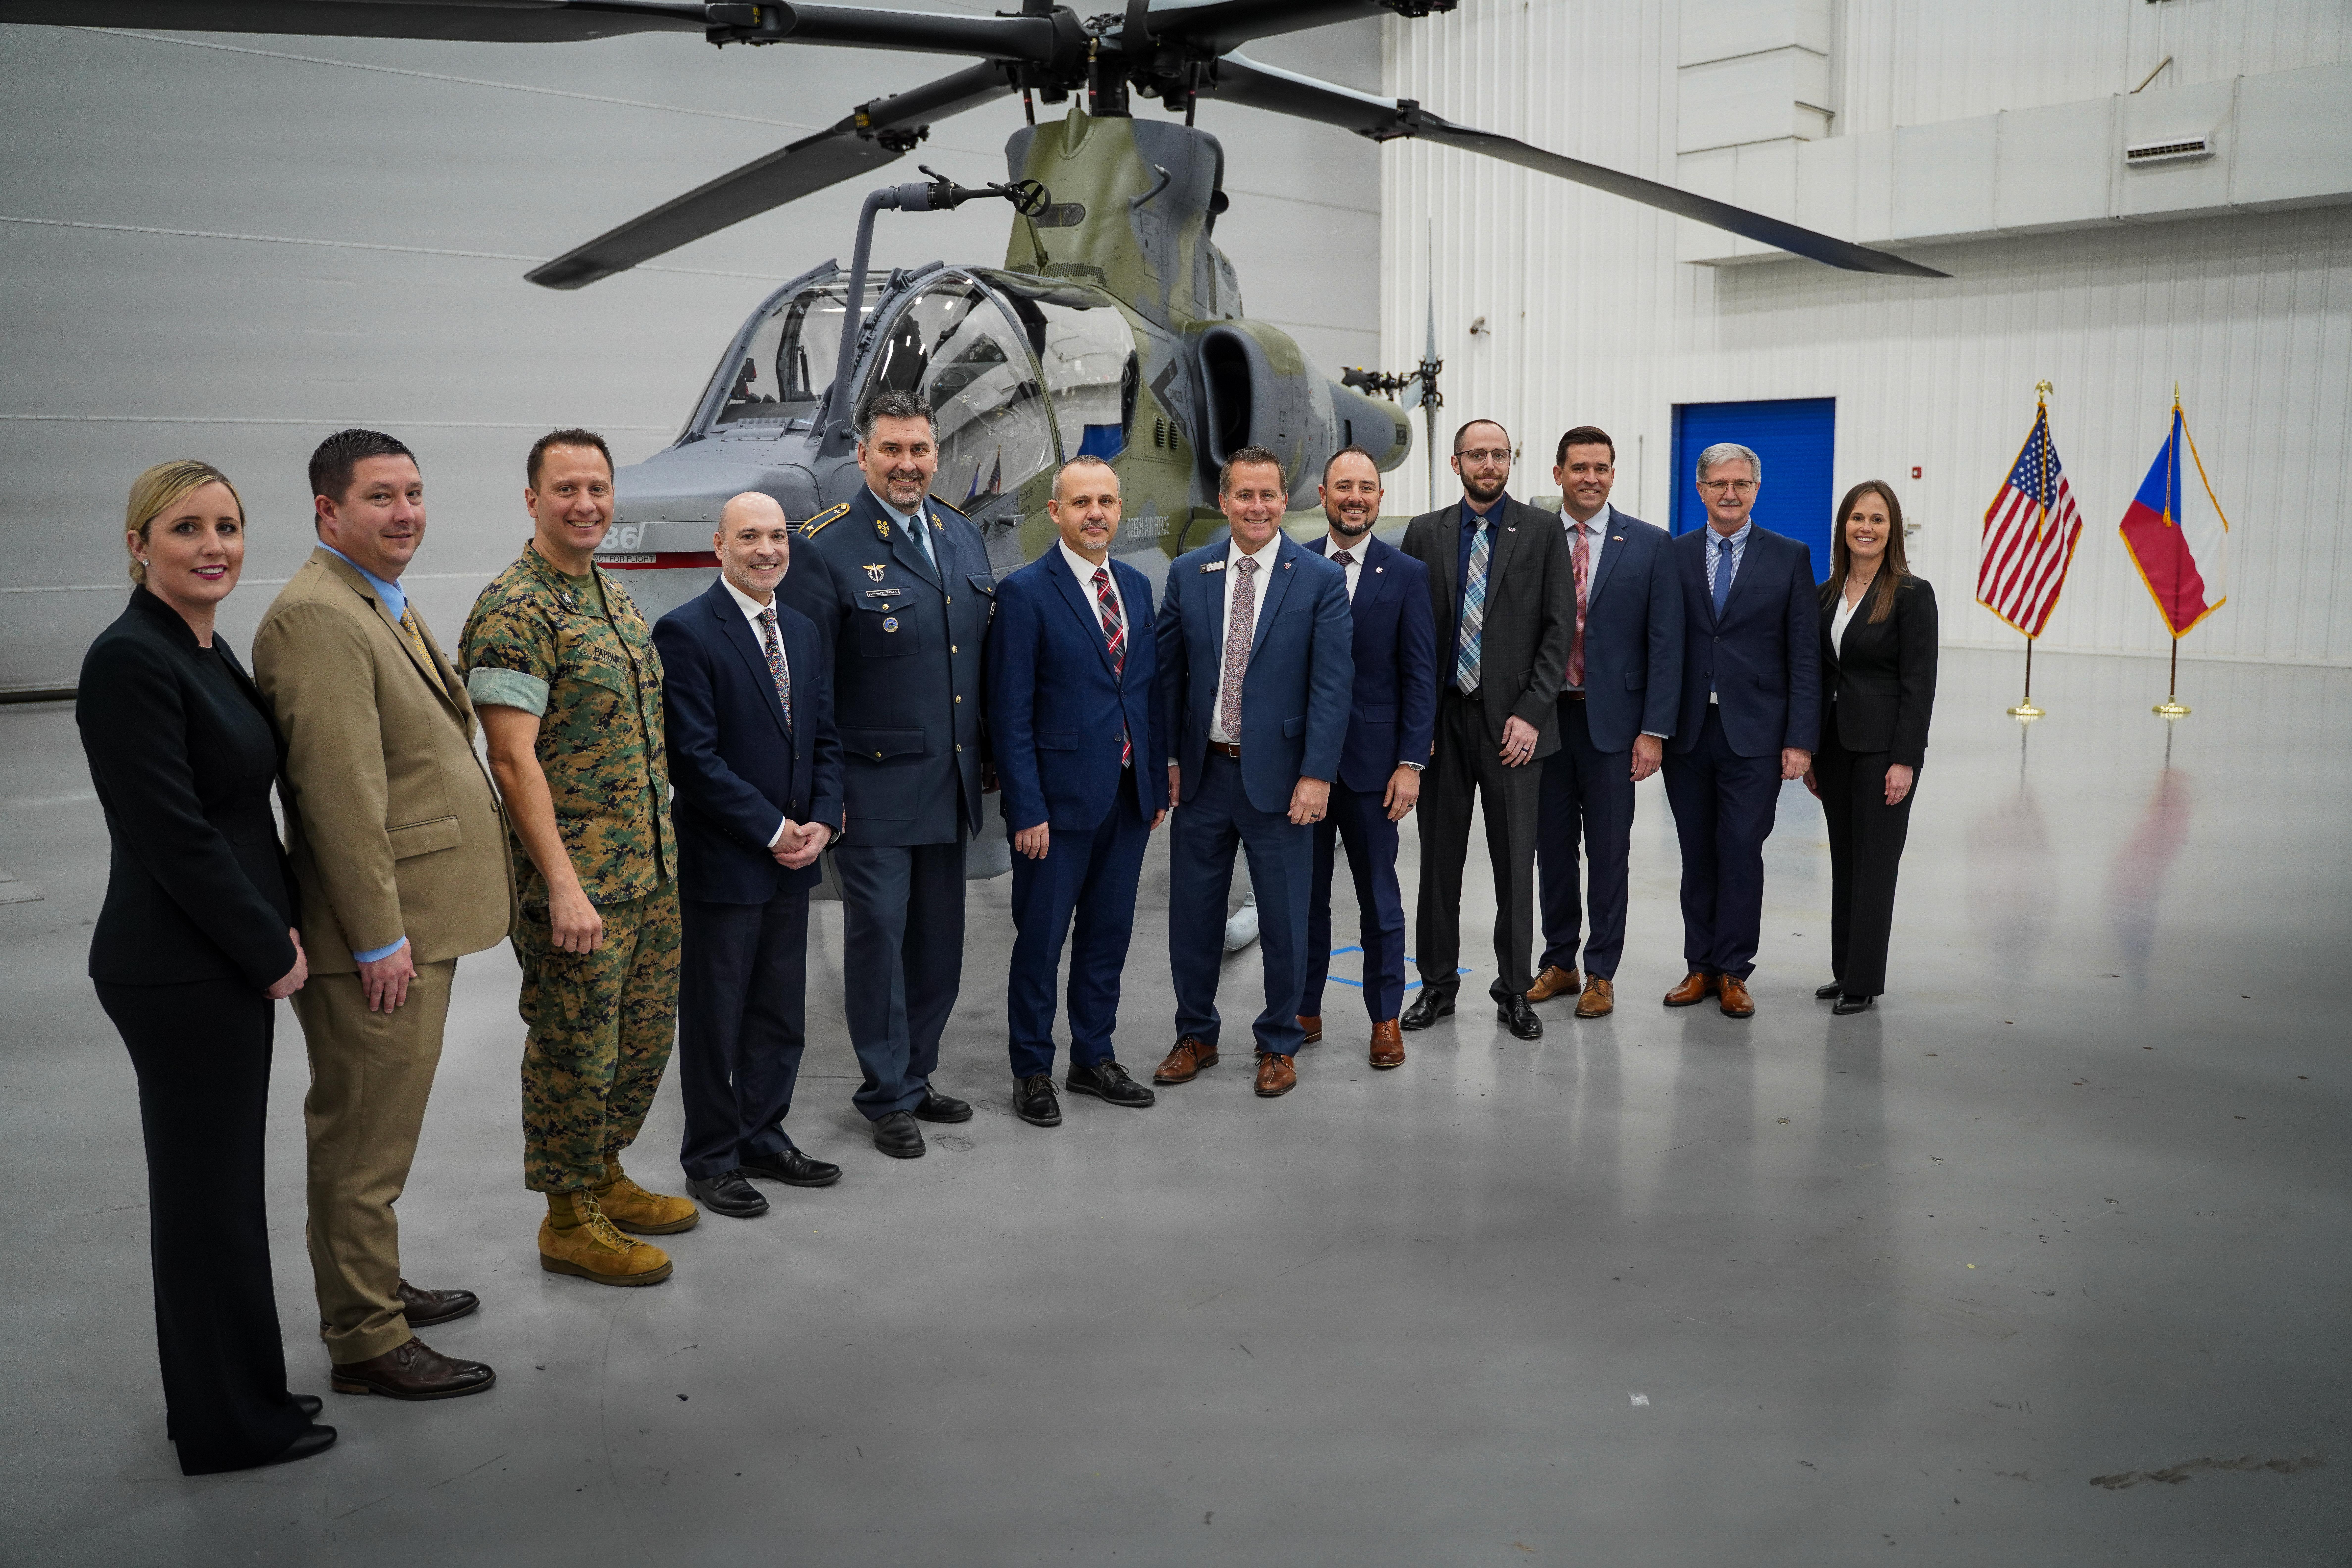 Various visitors from the Czech Republic Ministry of Defense, Naval Air Systems Command and Bell Textron pose for a photo with the recently unveiled AH-1Z Viper, the first designated to the Czech Republic Air Force.